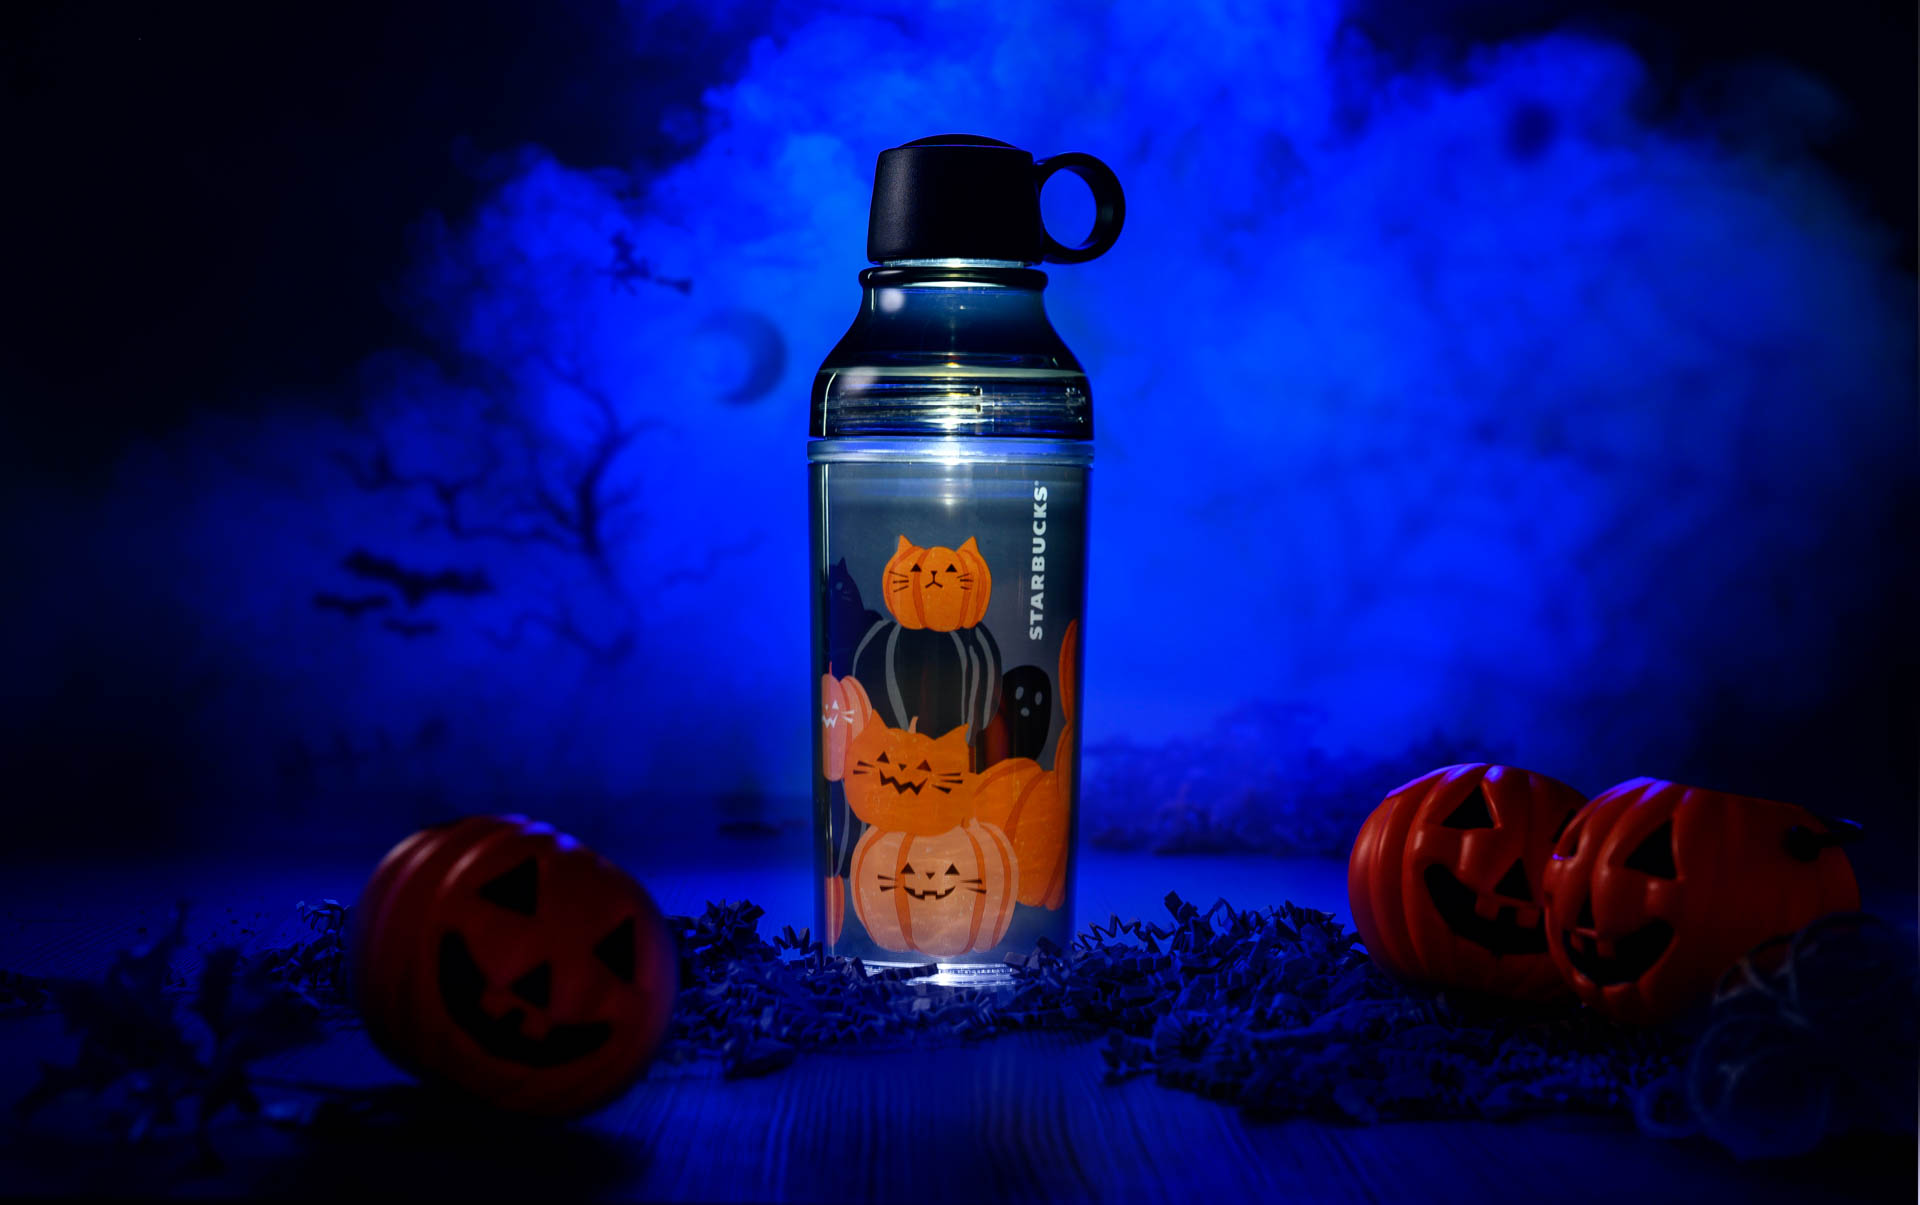 Starbucks Halloween-themed treats and merch are here – these new cups are spookily adorable - Alvinology